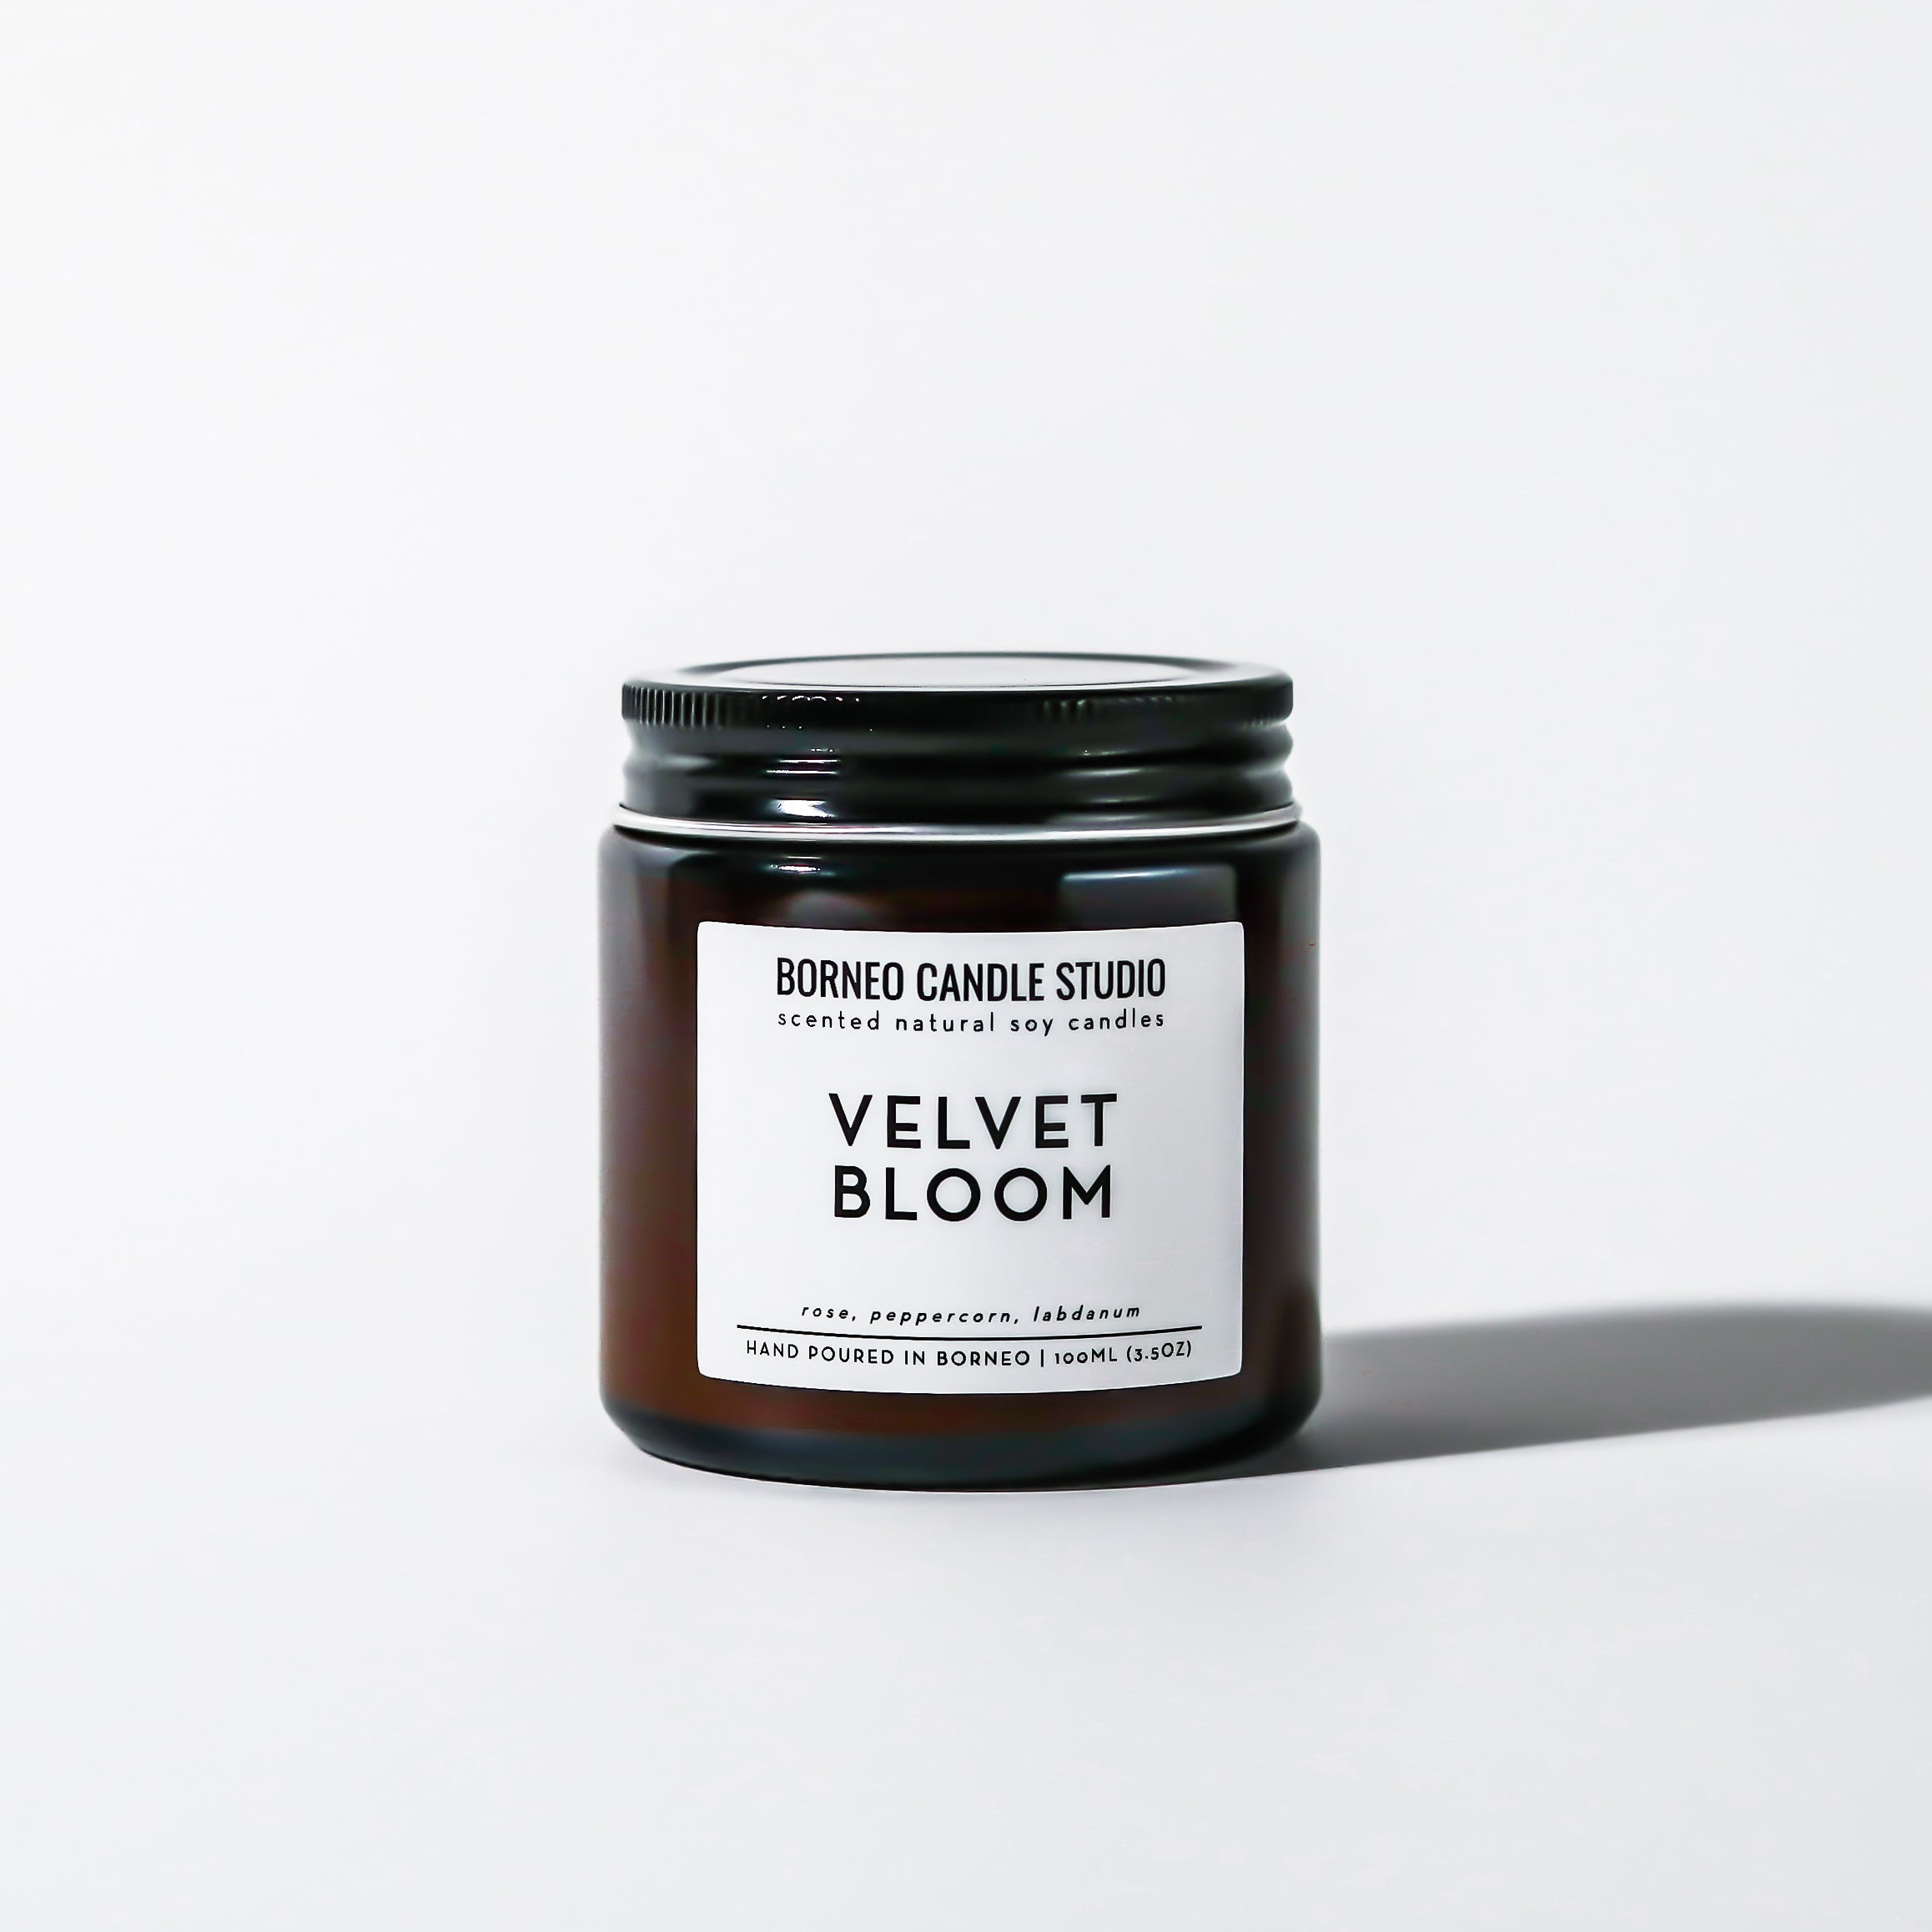 Velvet Bloom Scented Candle - fragrance notes of roses, peppercorn and labdanum